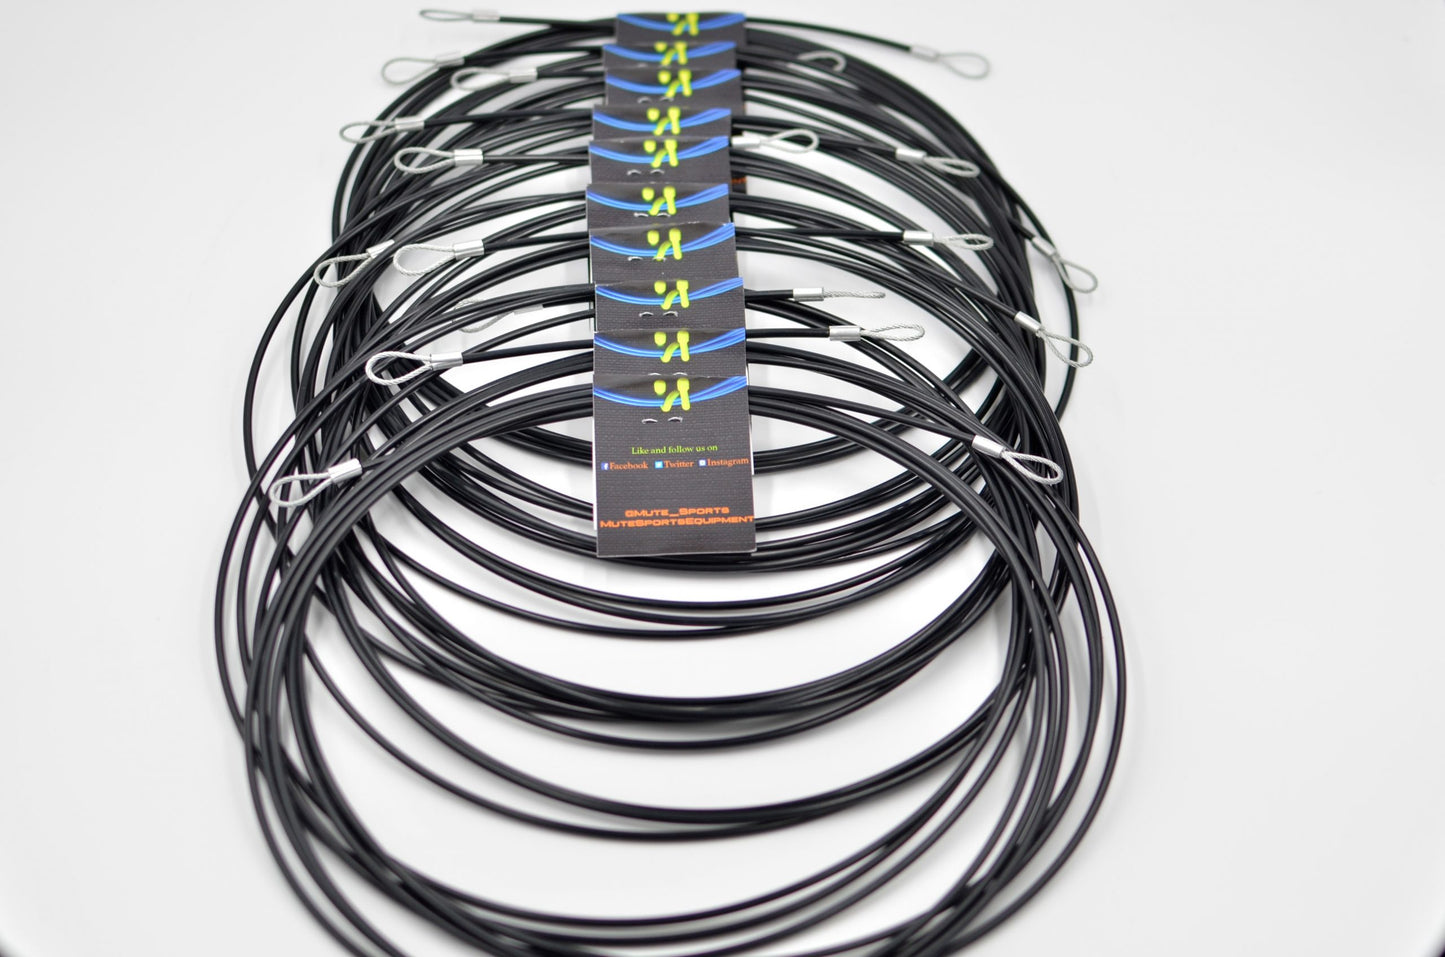 10 Custom Length Black Replacement Cables